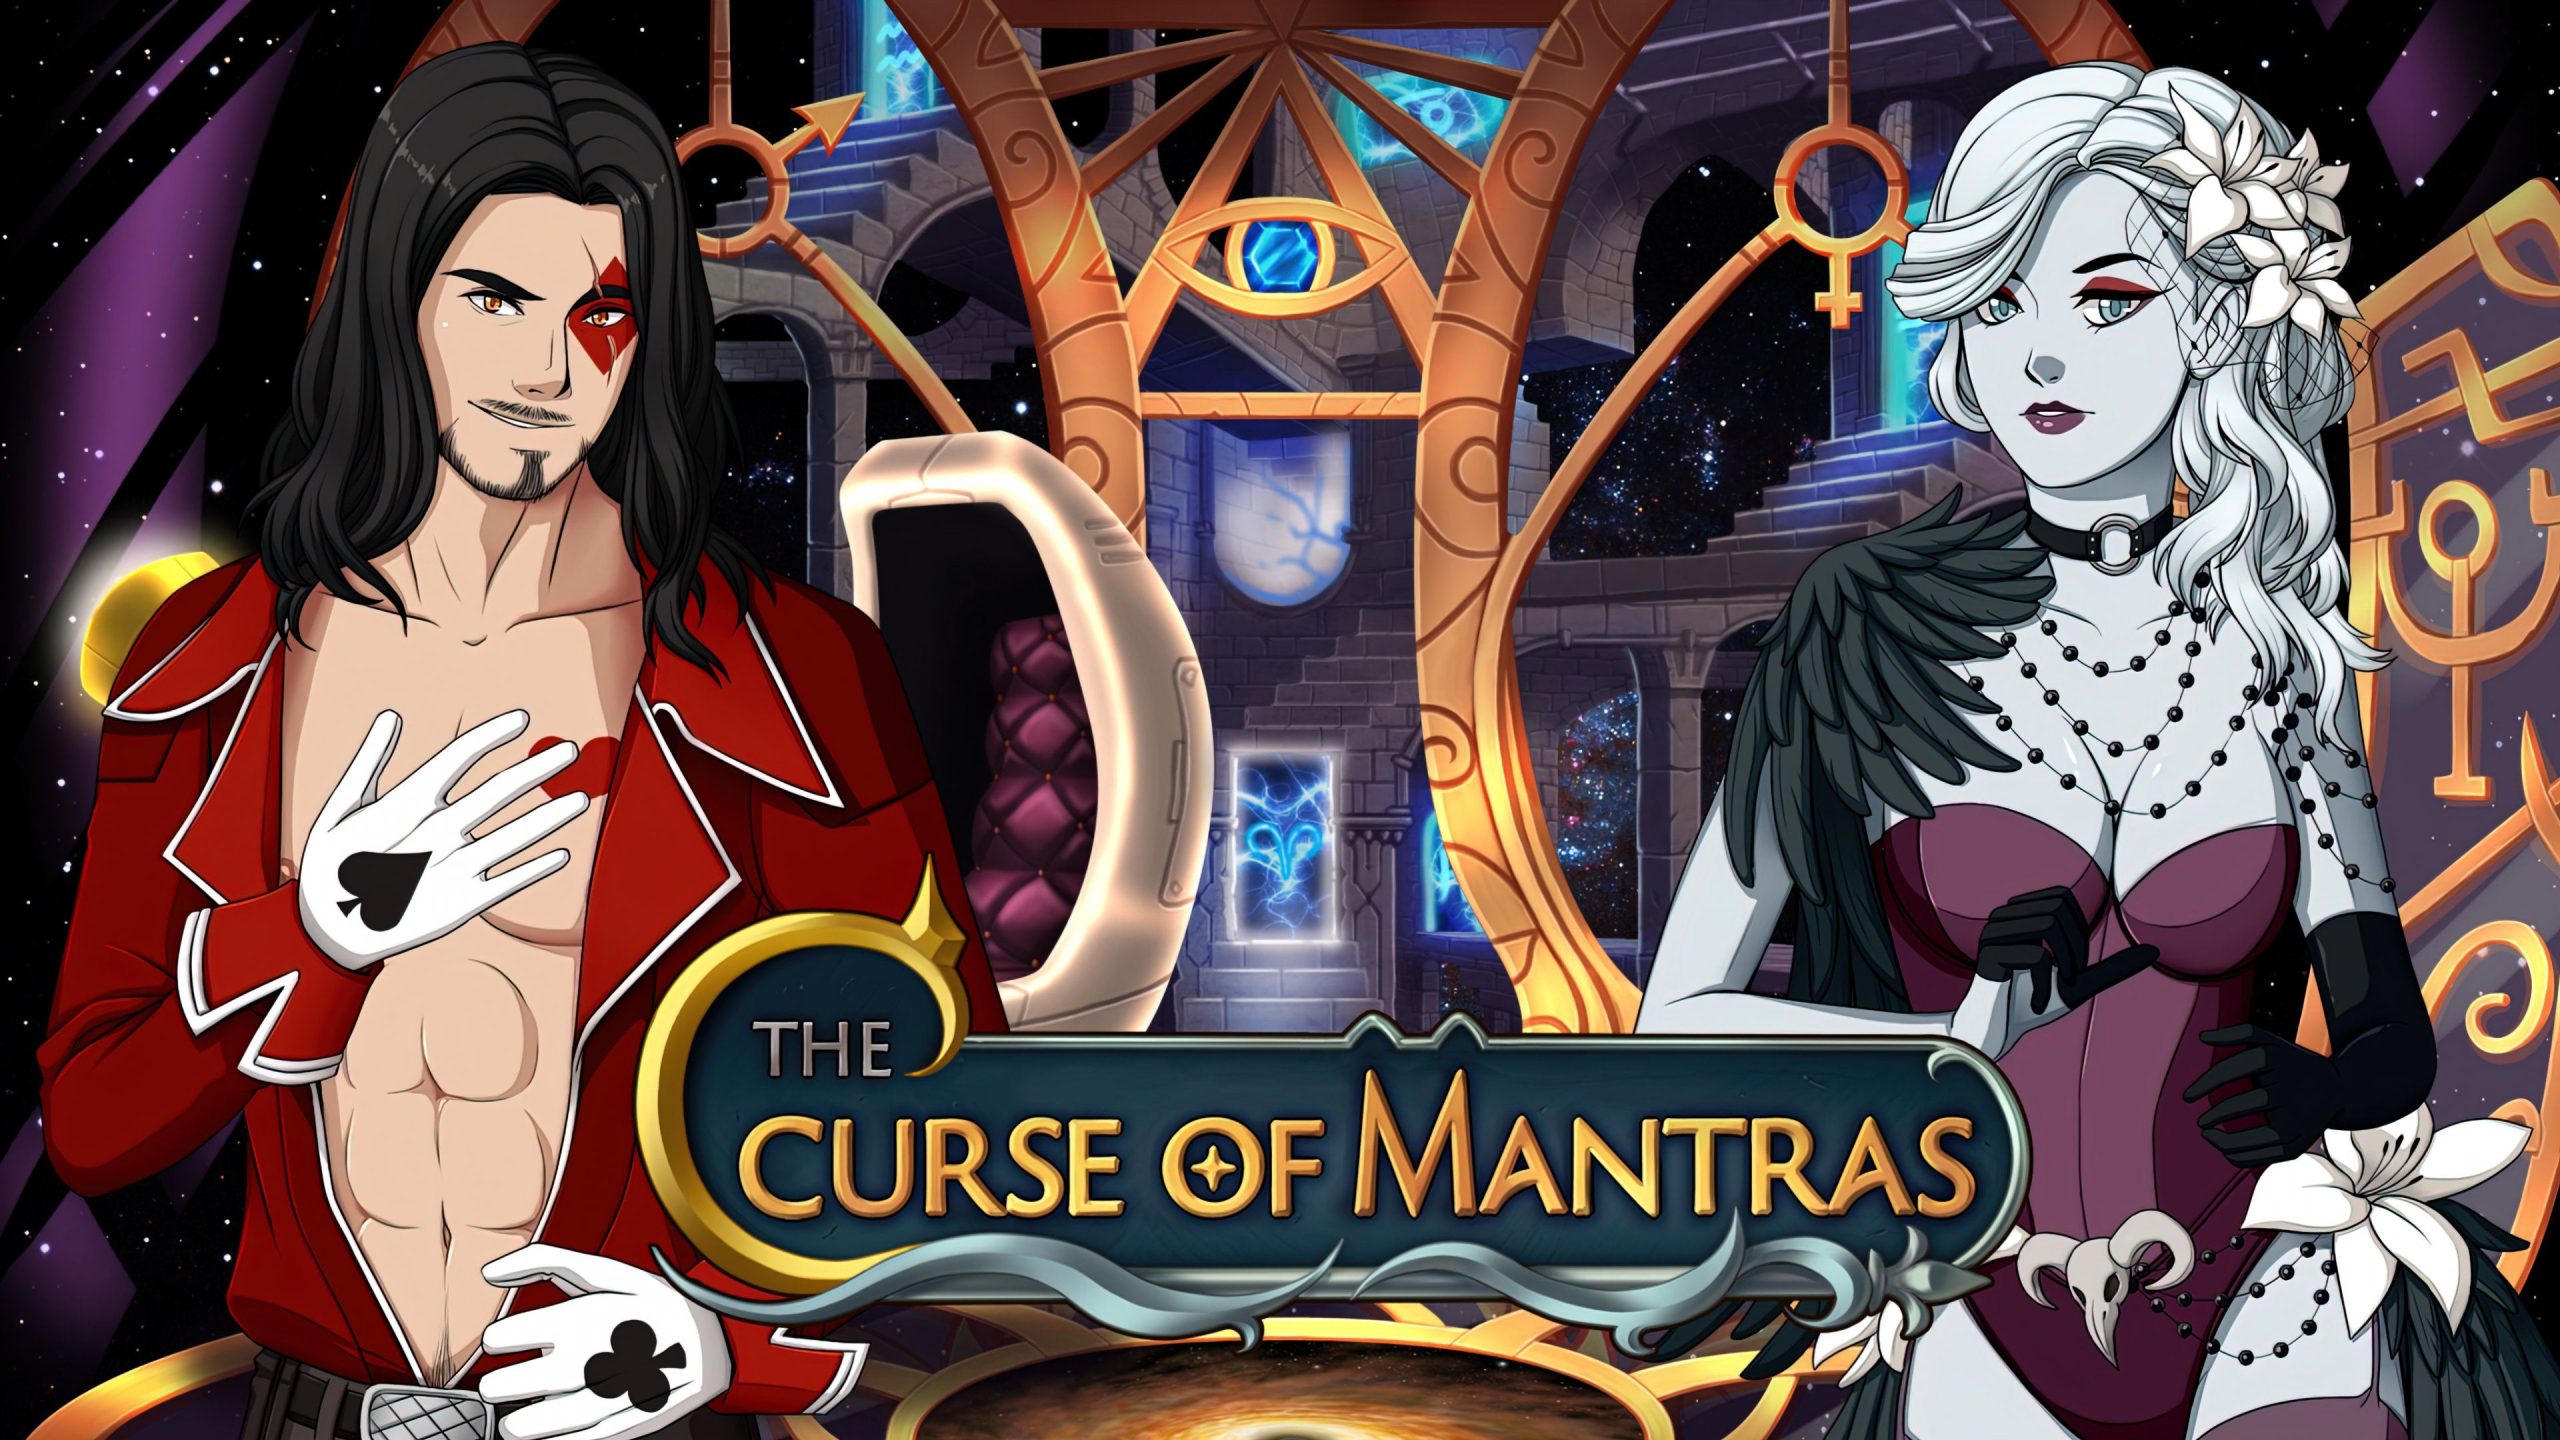 The Curse of Mantras [Finished] - Version: 1.0.2